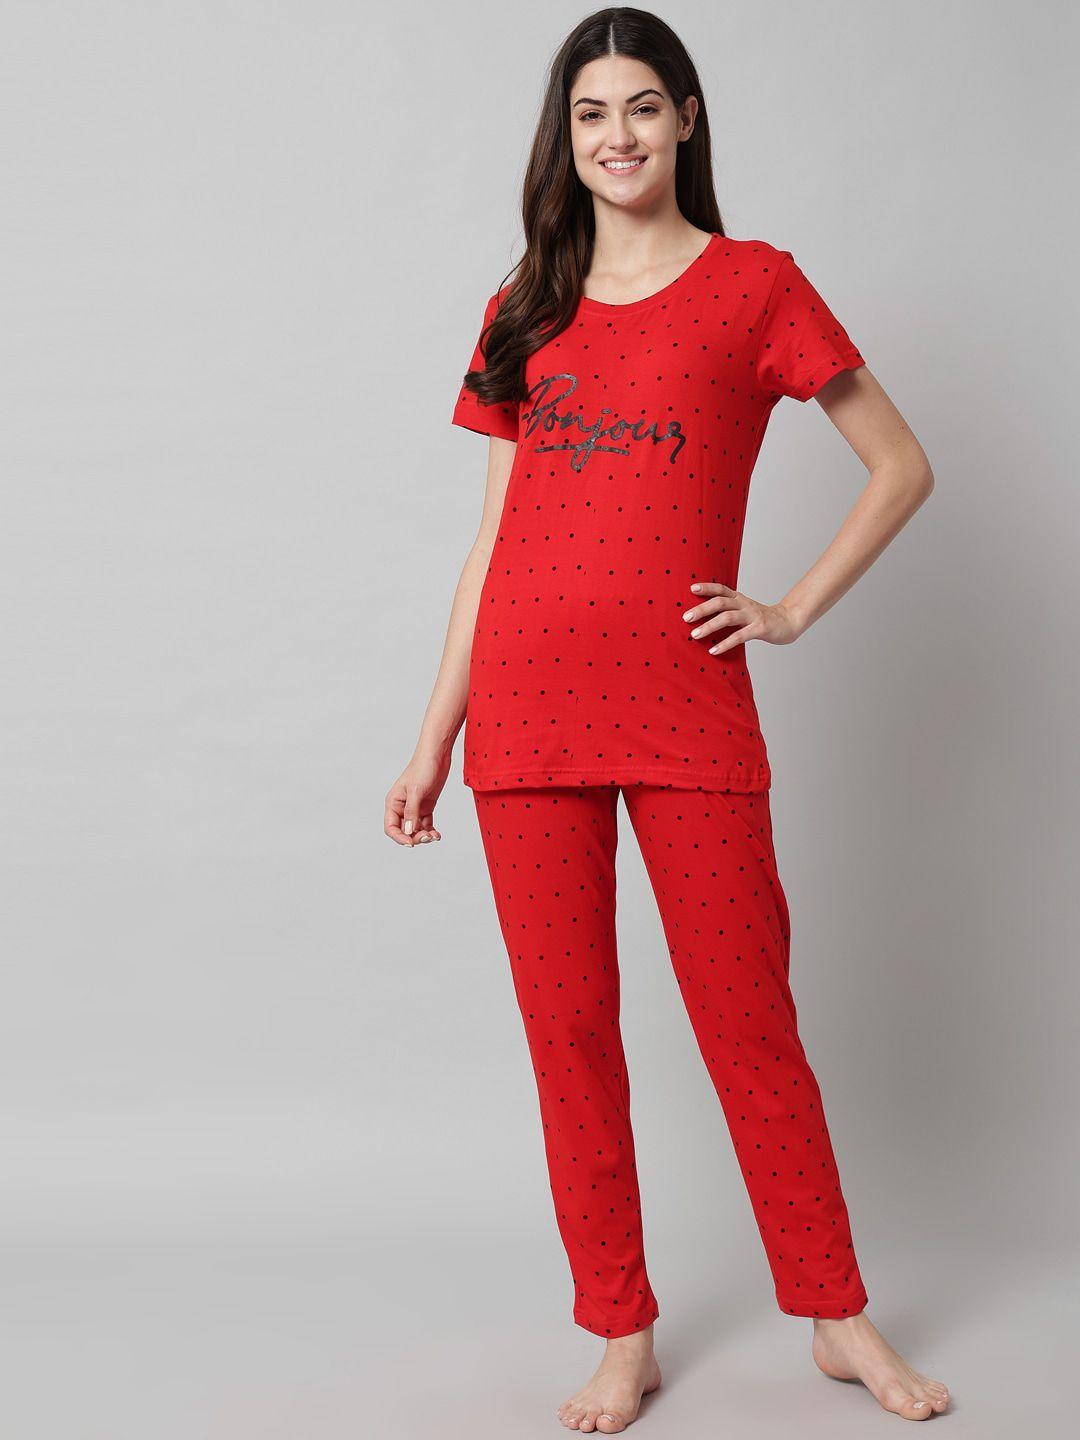 sephani women red & black printed night suit tb-red-dot-1806-s-red